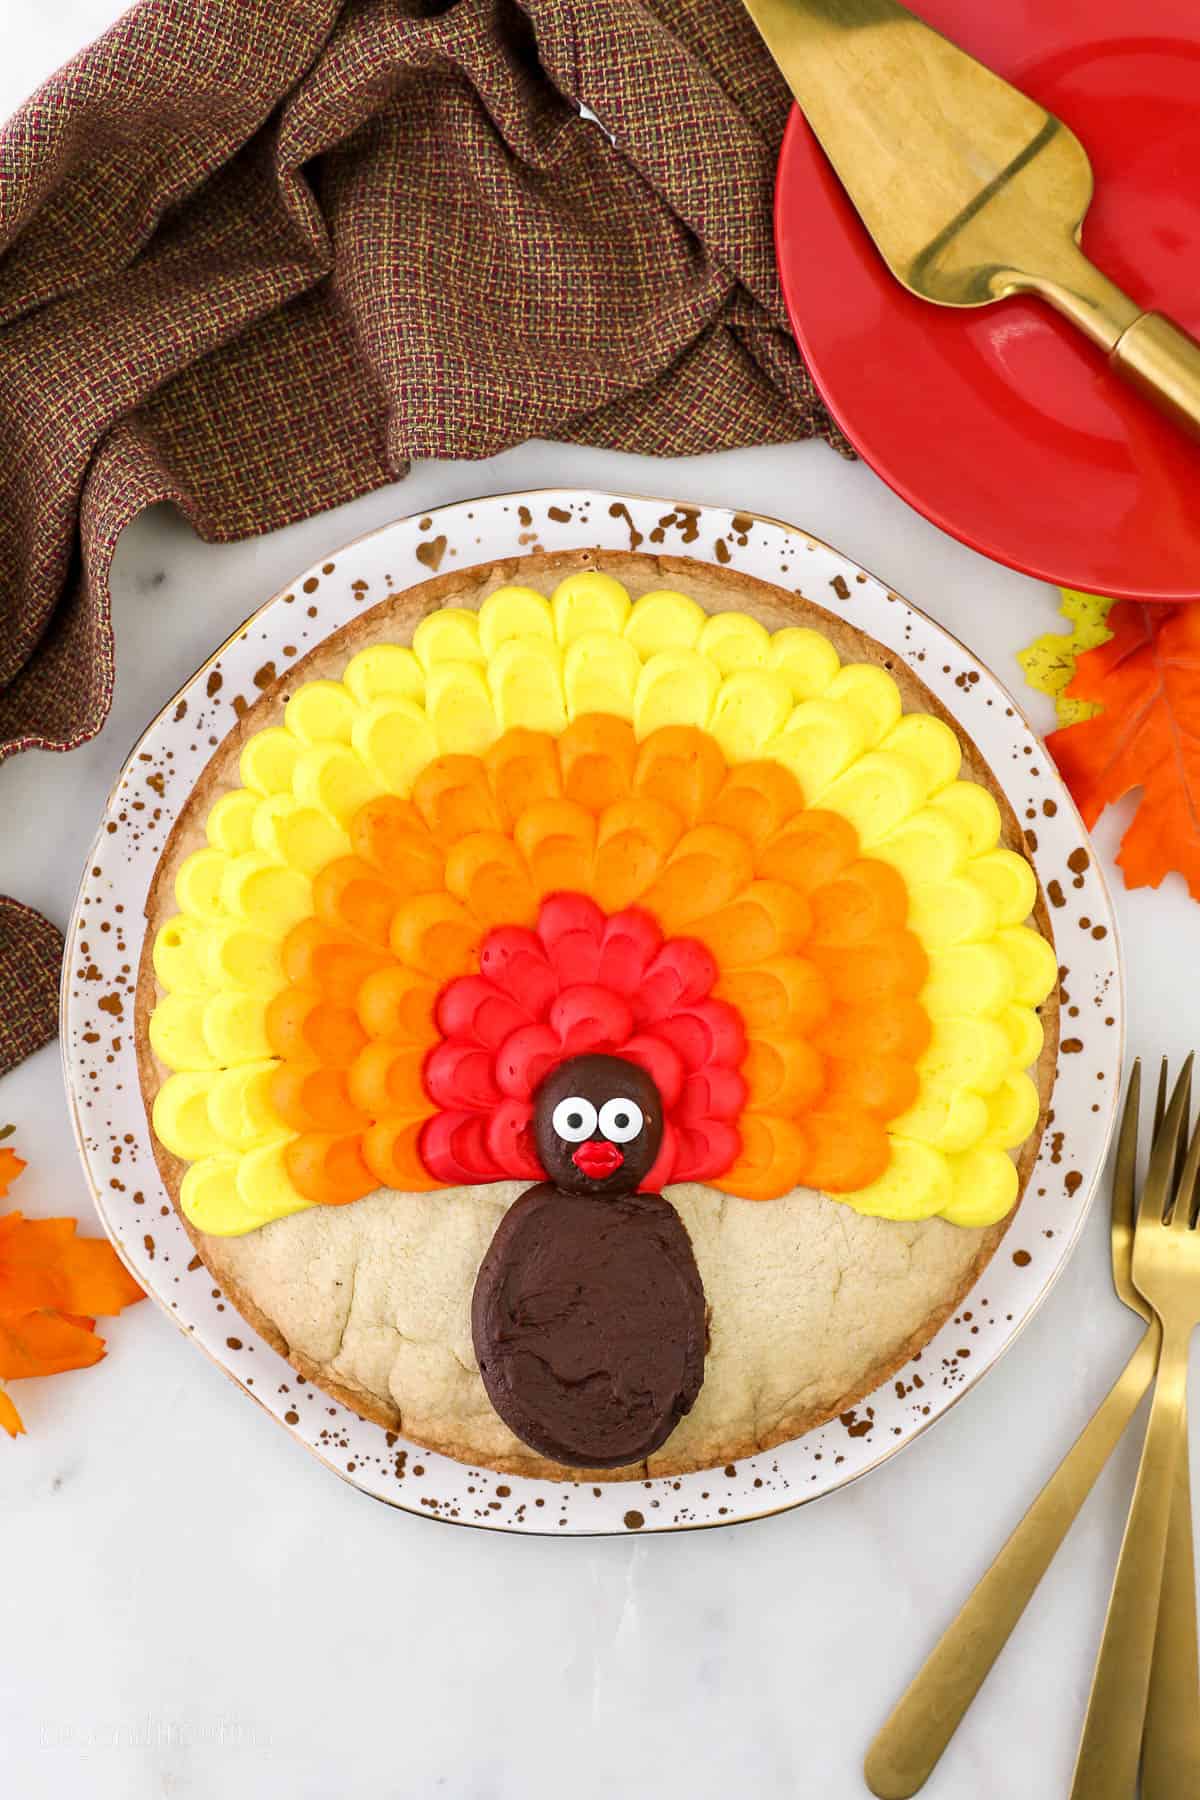 A cookie cake decorated with buttercream to look like a turkey on a plate surrounded with plates, napkin and utensils.